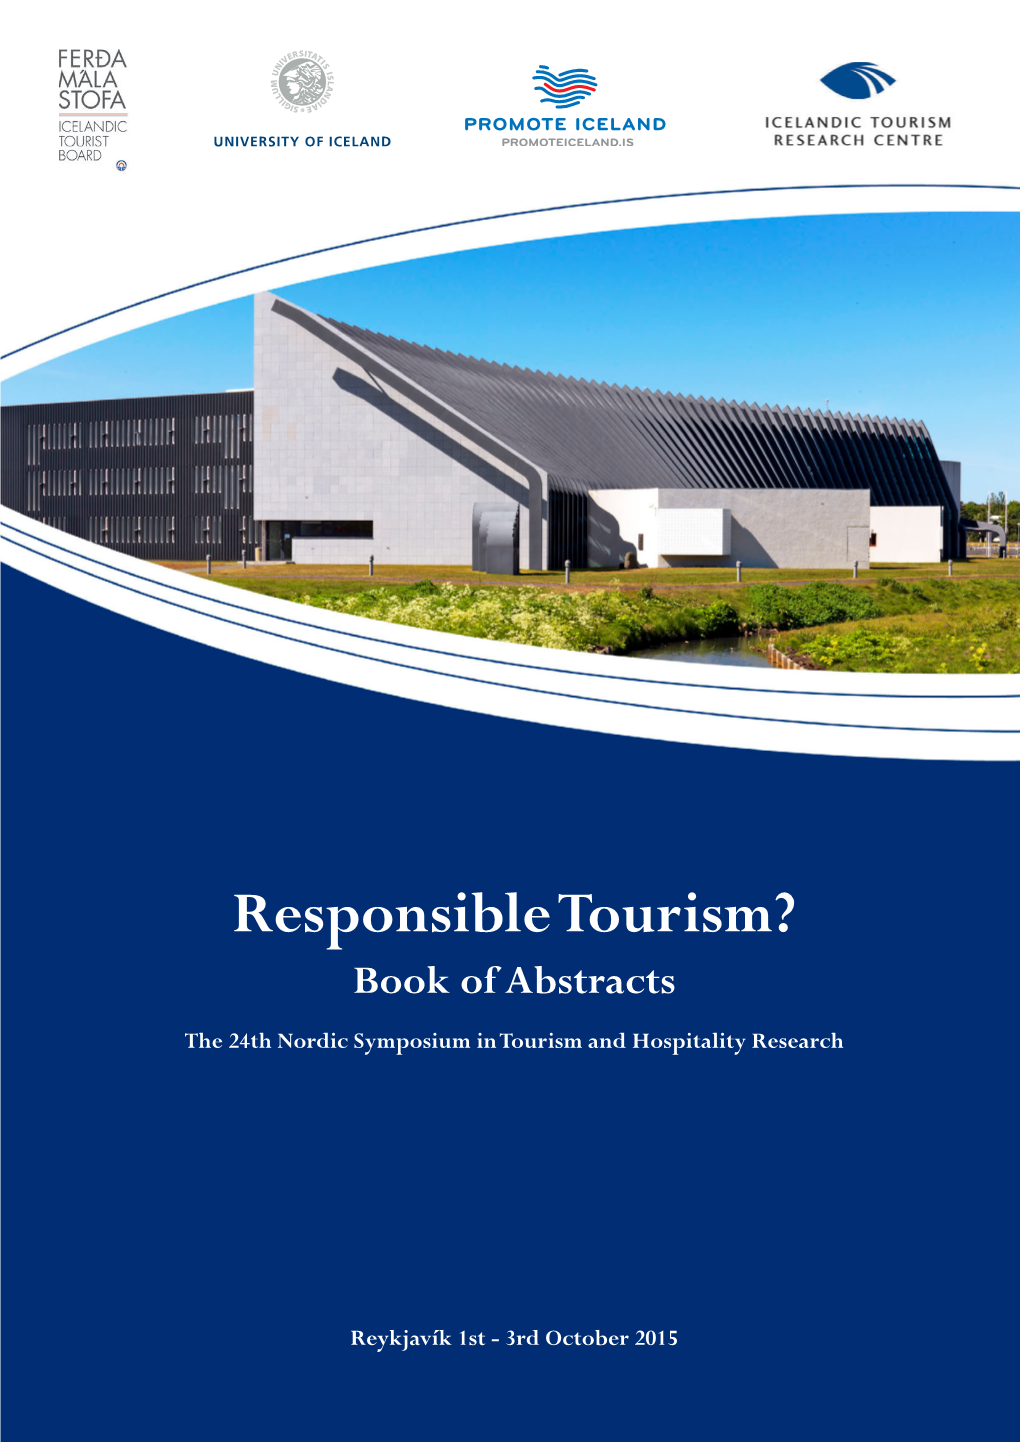 Responsible Tourism? Book of Abstracts